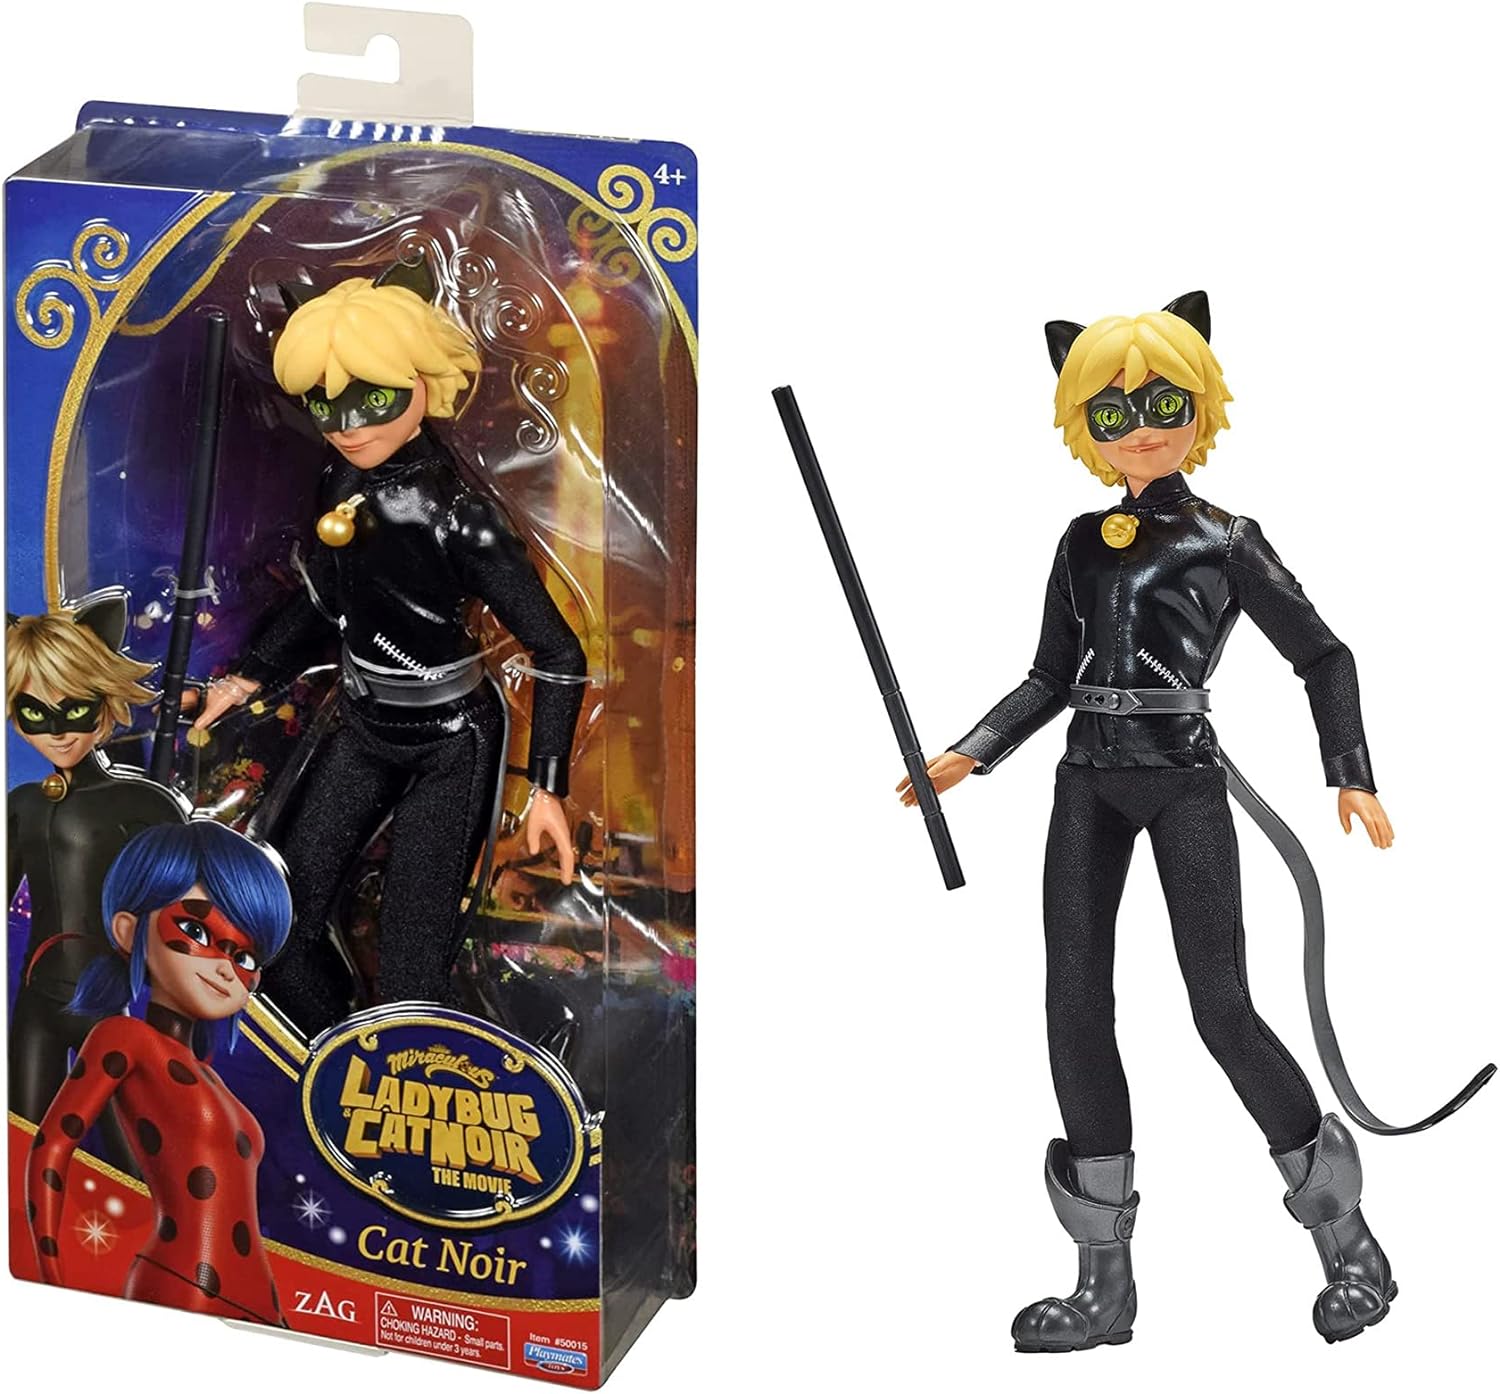 christopher john day recommends miraculous ladybug pictures of cat noir pic